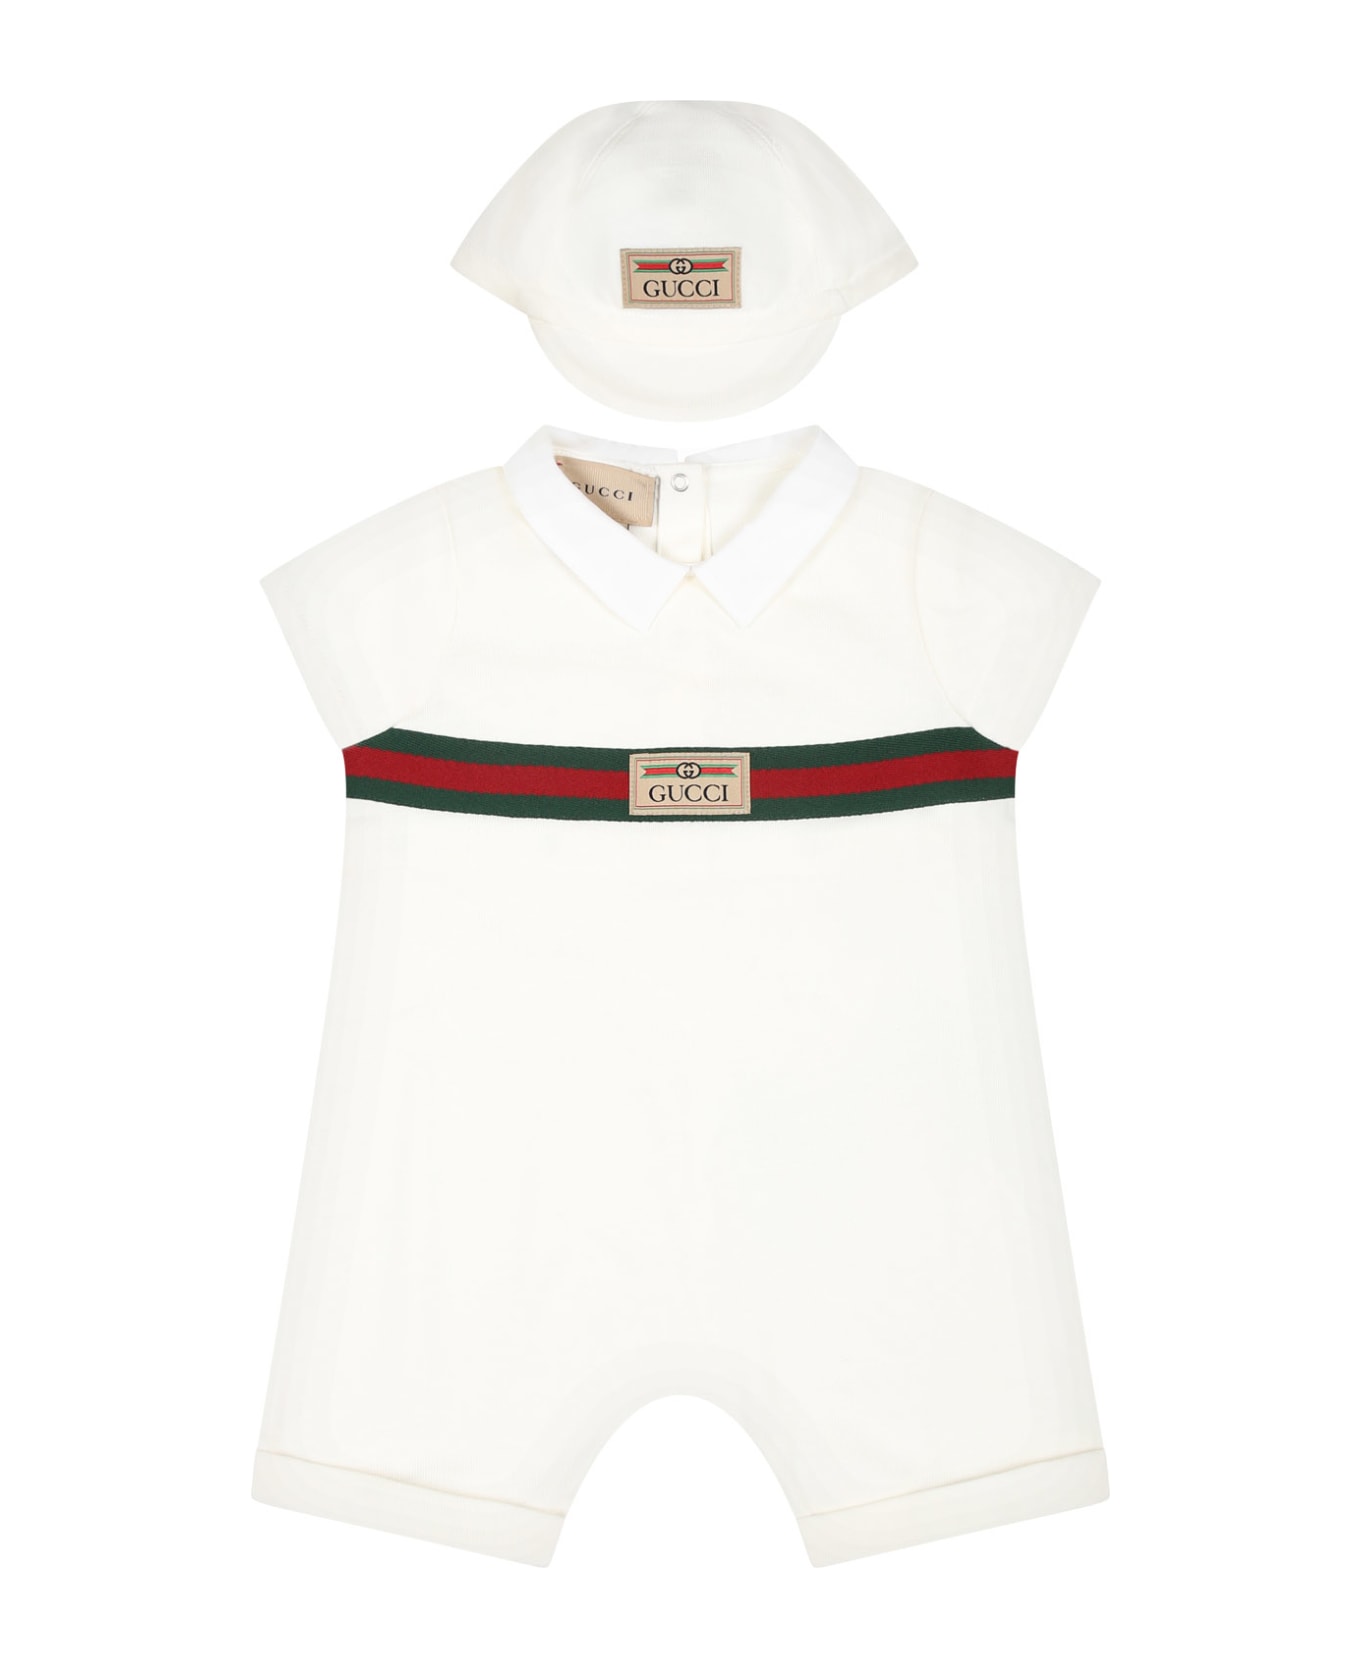 Gucci White Set For Baby Boy With Logo - White